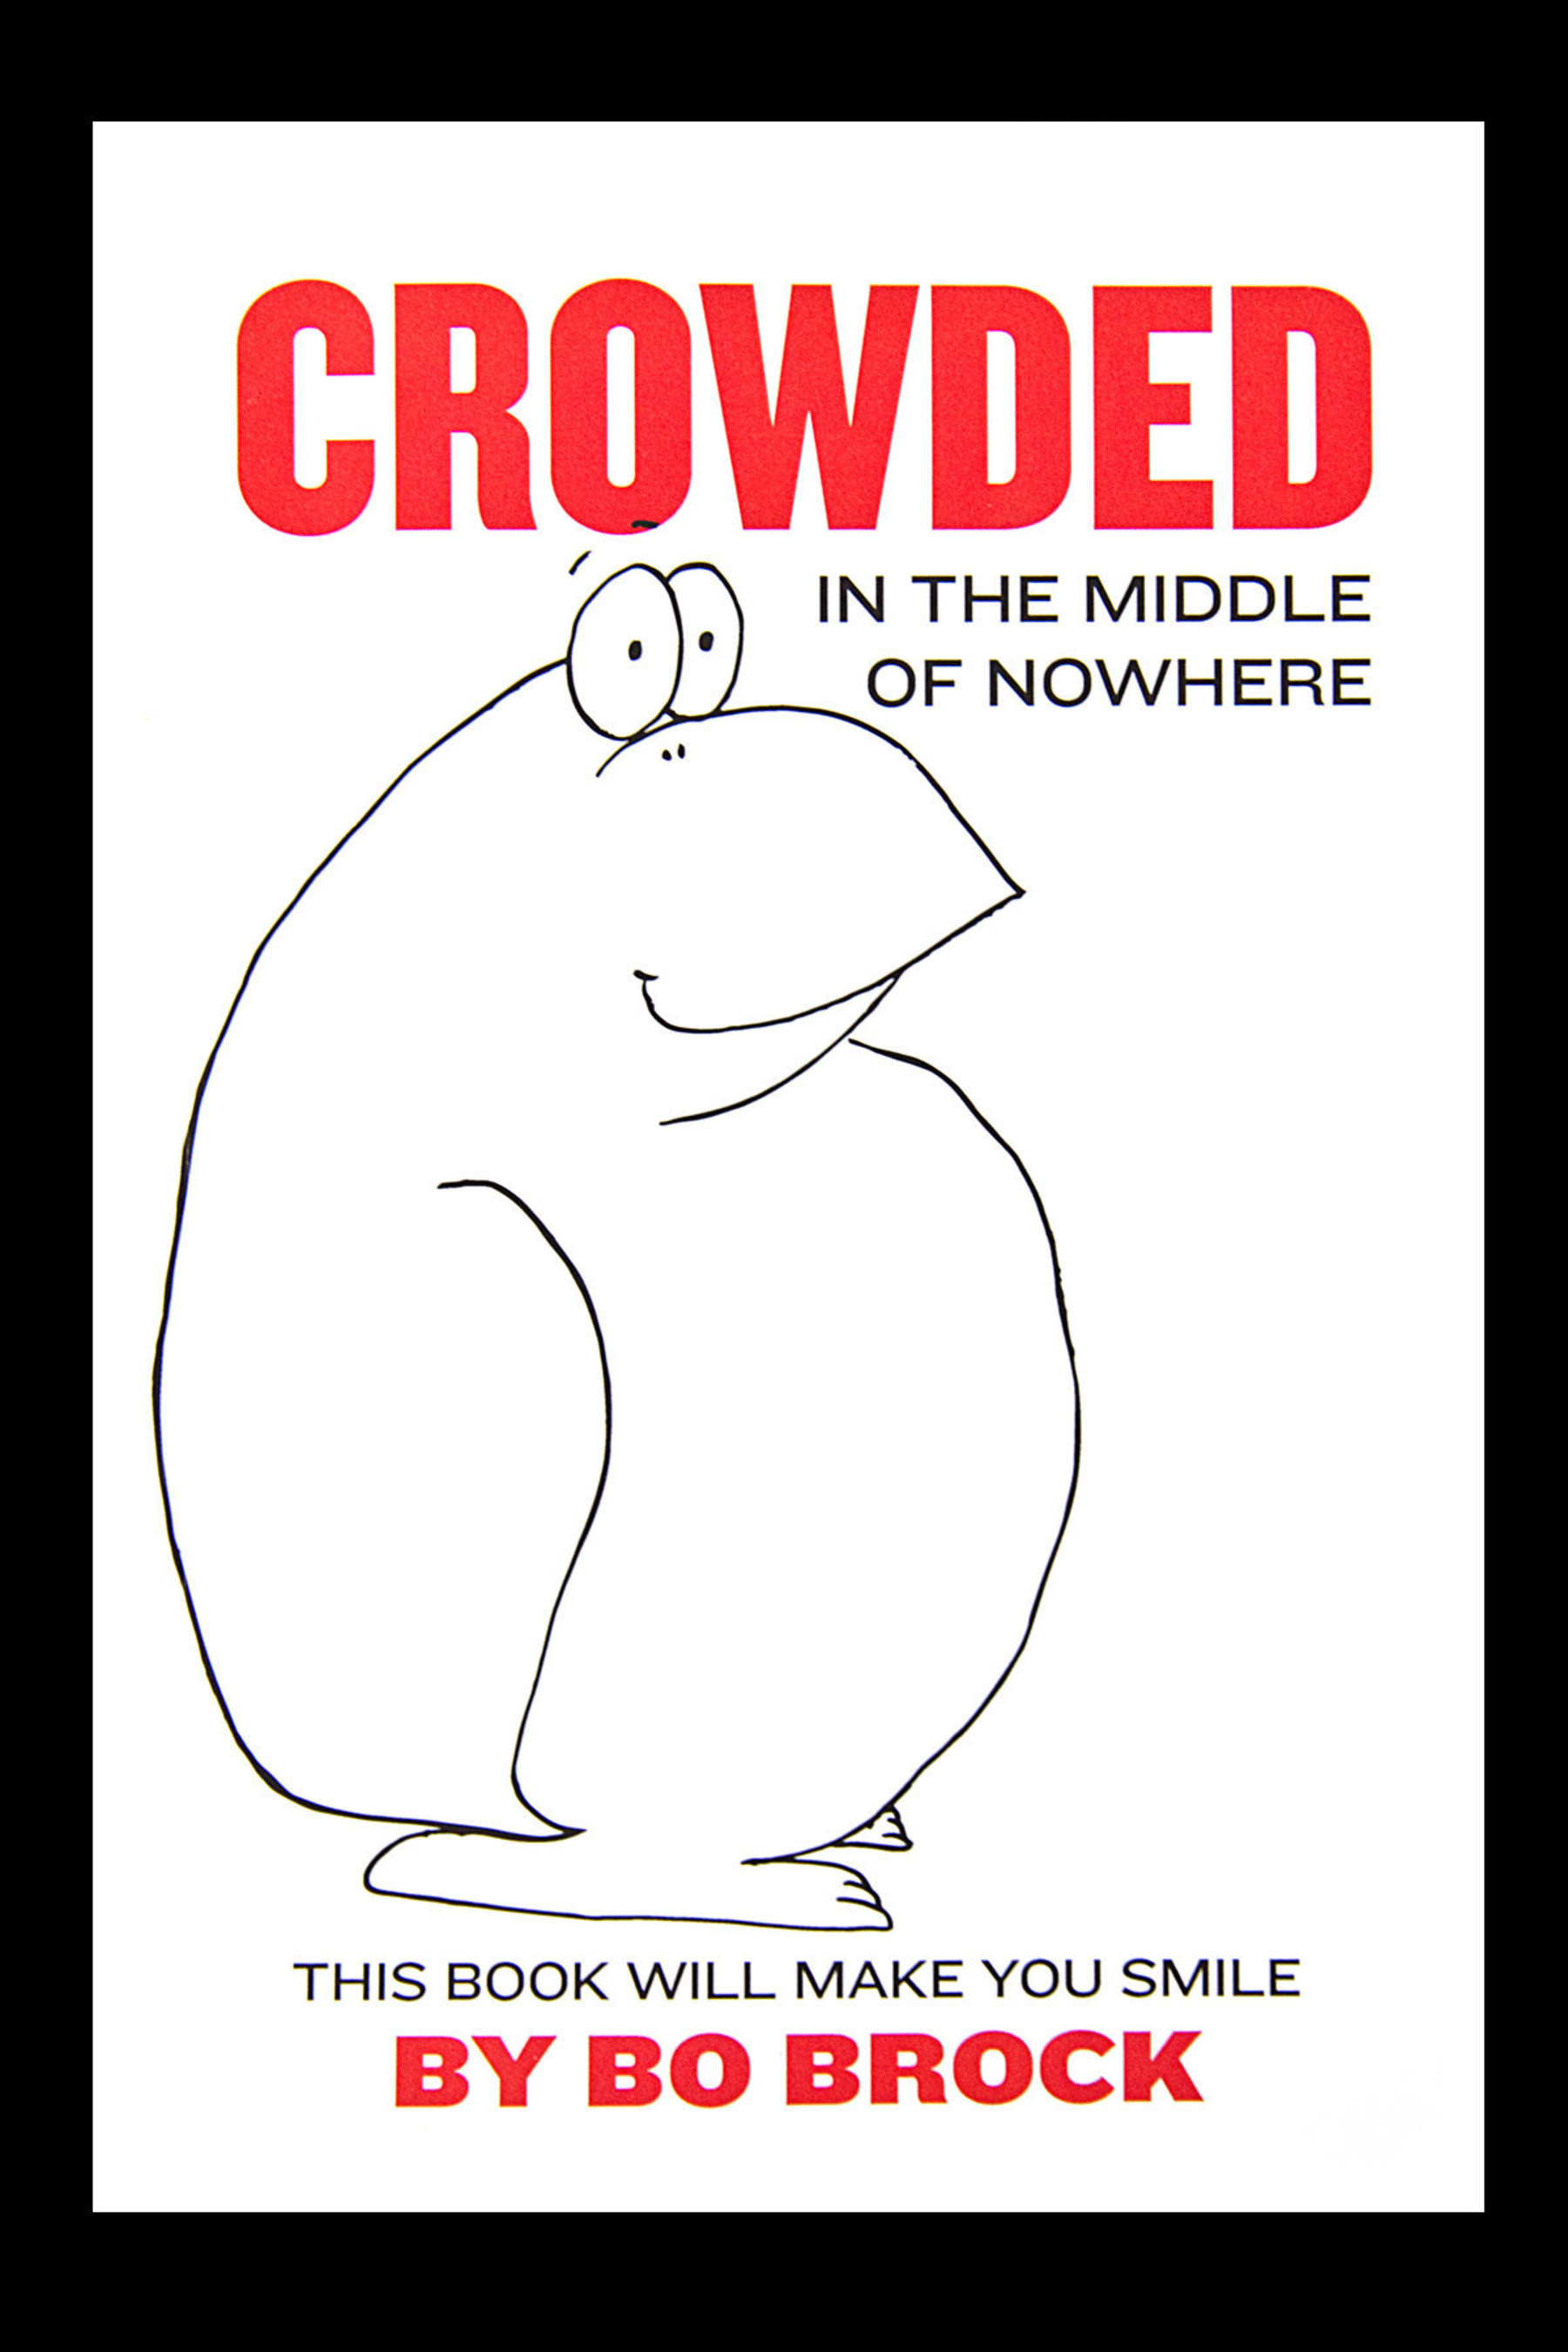 Crowded in the Middle of Nowhere, a book that will make you smile. (PRNewsFoto/Rare Bird Publishing)